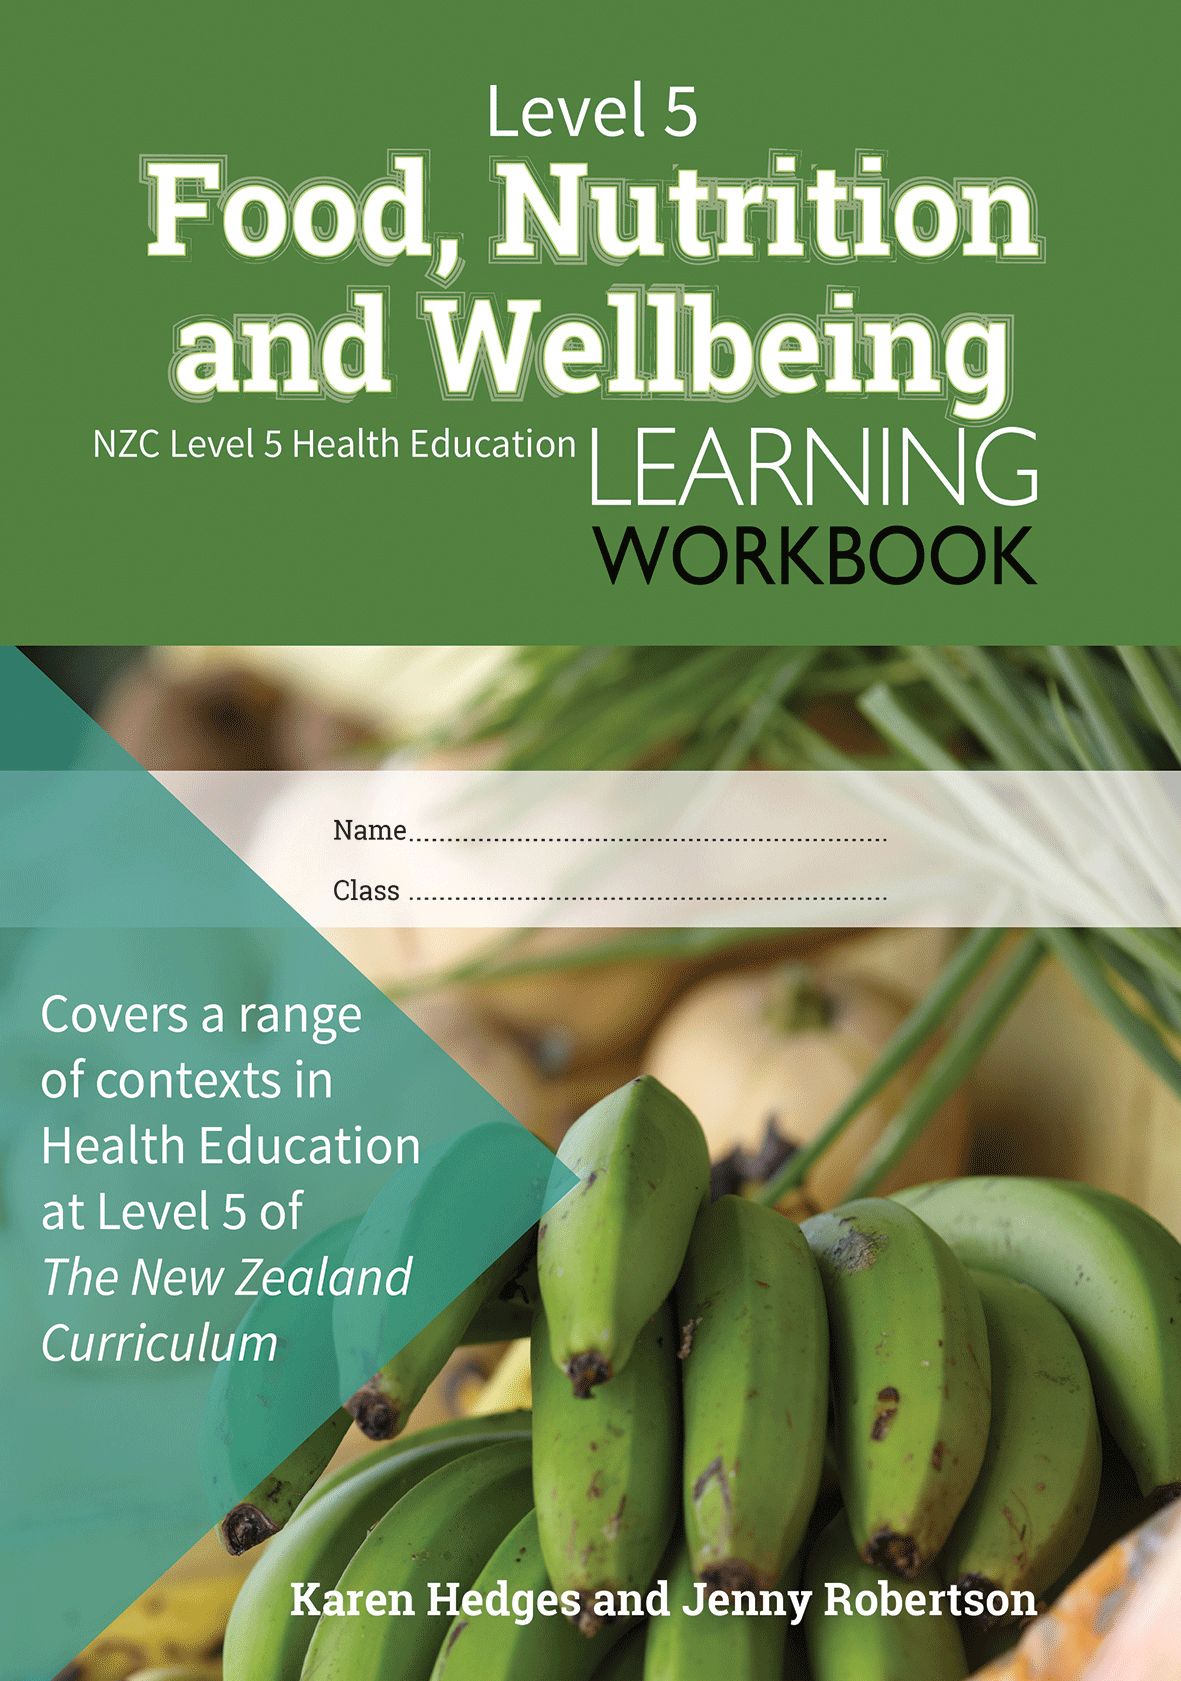 Level 5 Food, Nutrition and Wellbeing Learning Workbook